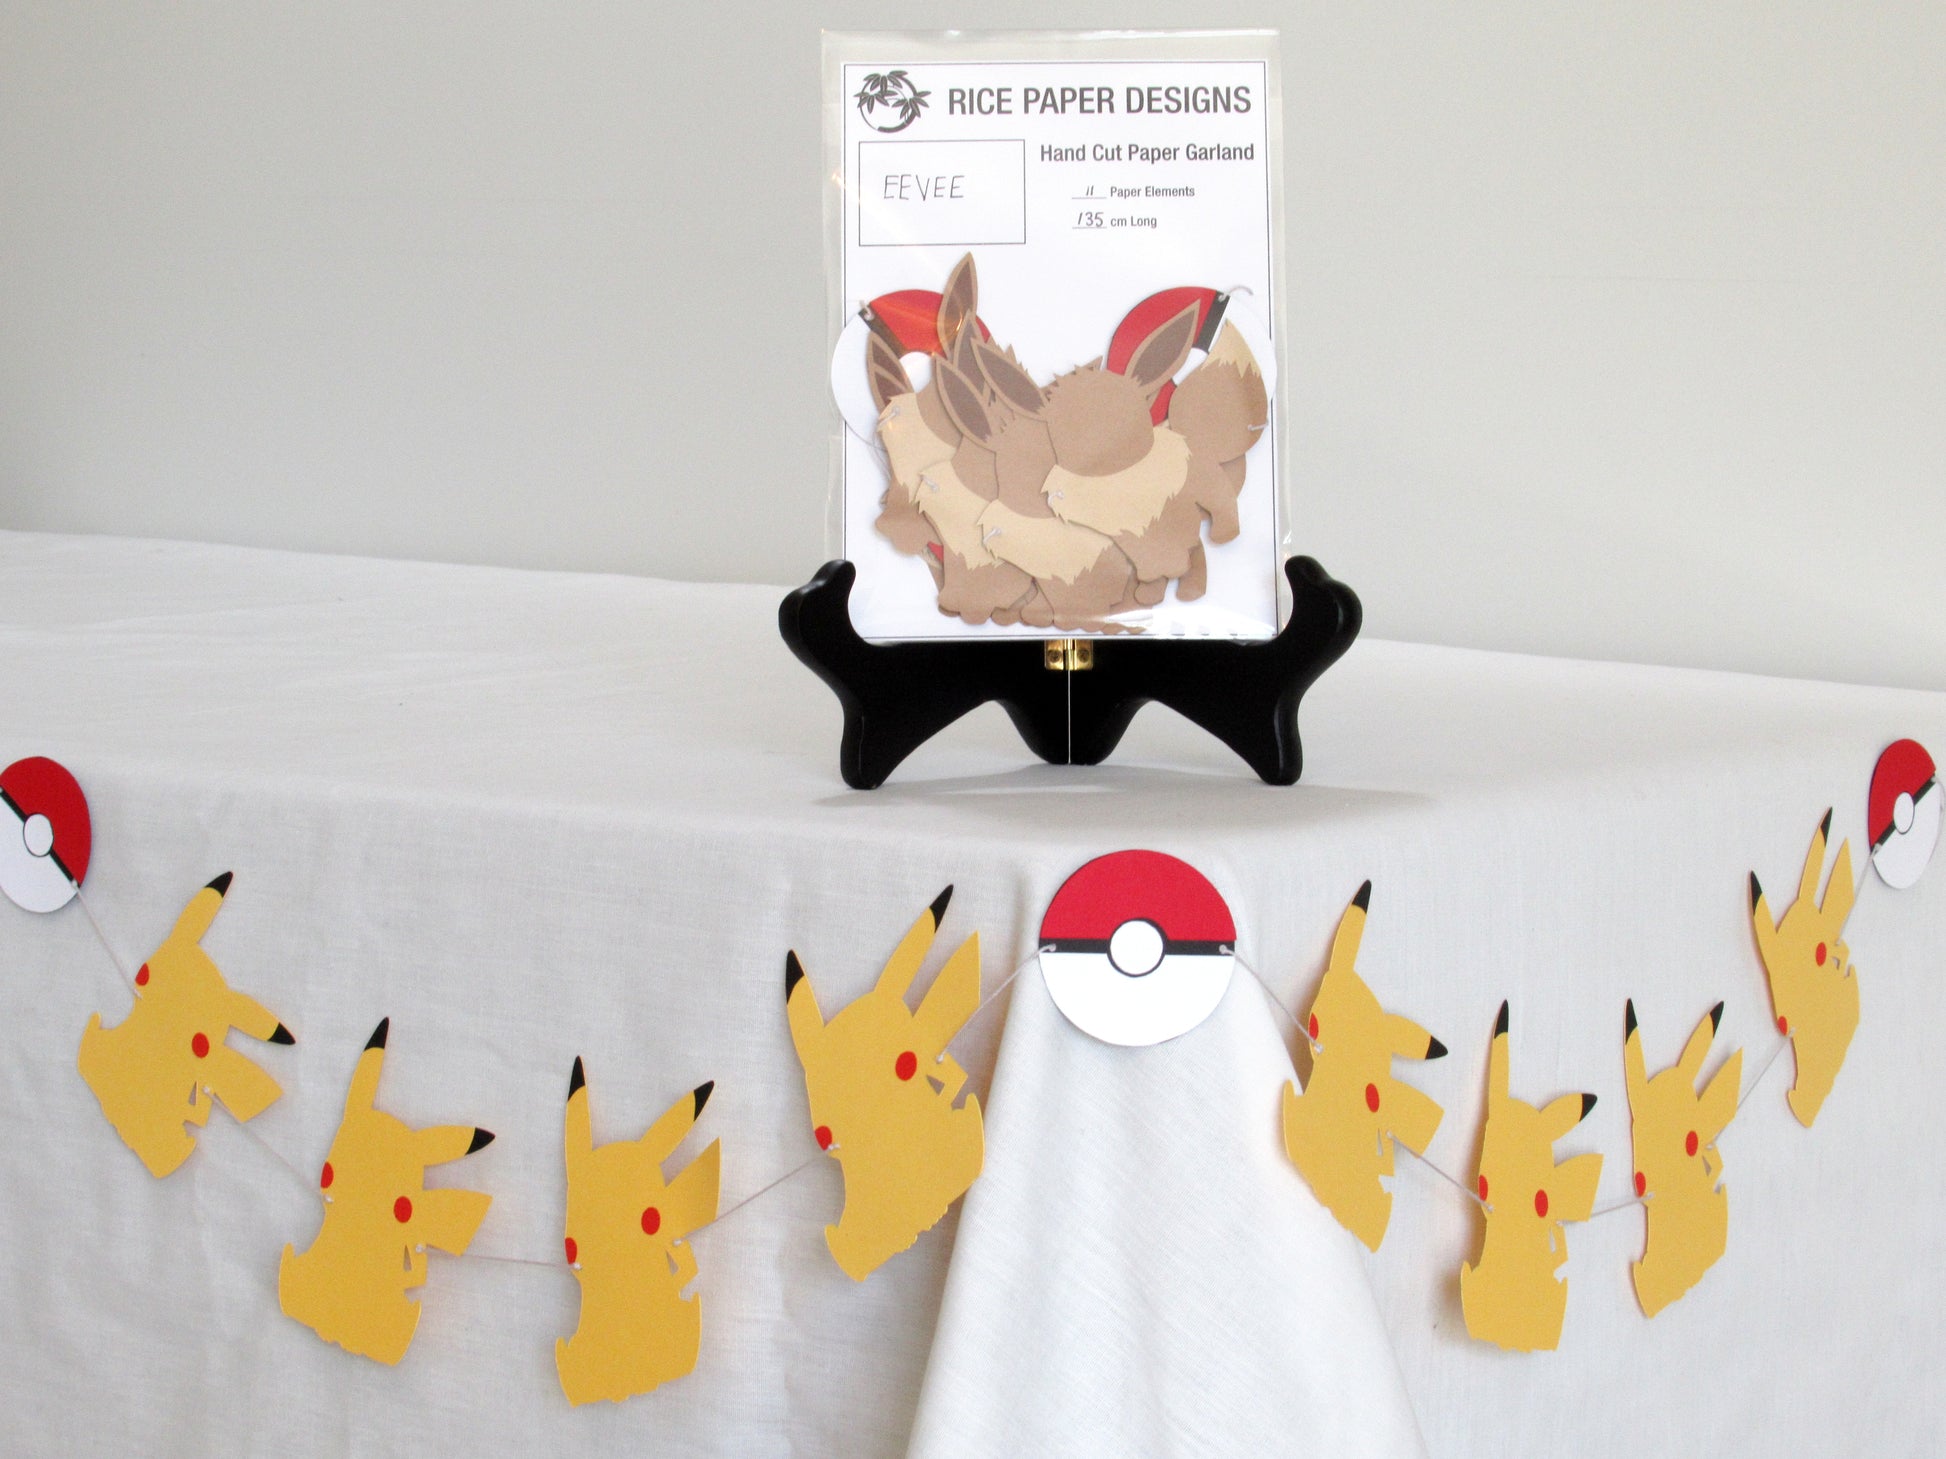 A garland with a series of paper eevee and pokeballs arranged in neat bundle inside a clear bag. There is a paper behind them showing the Rice Paper Designs logo, and information about the garland. The bag is on a table, and below it is a sample garland with pikachu hung up.